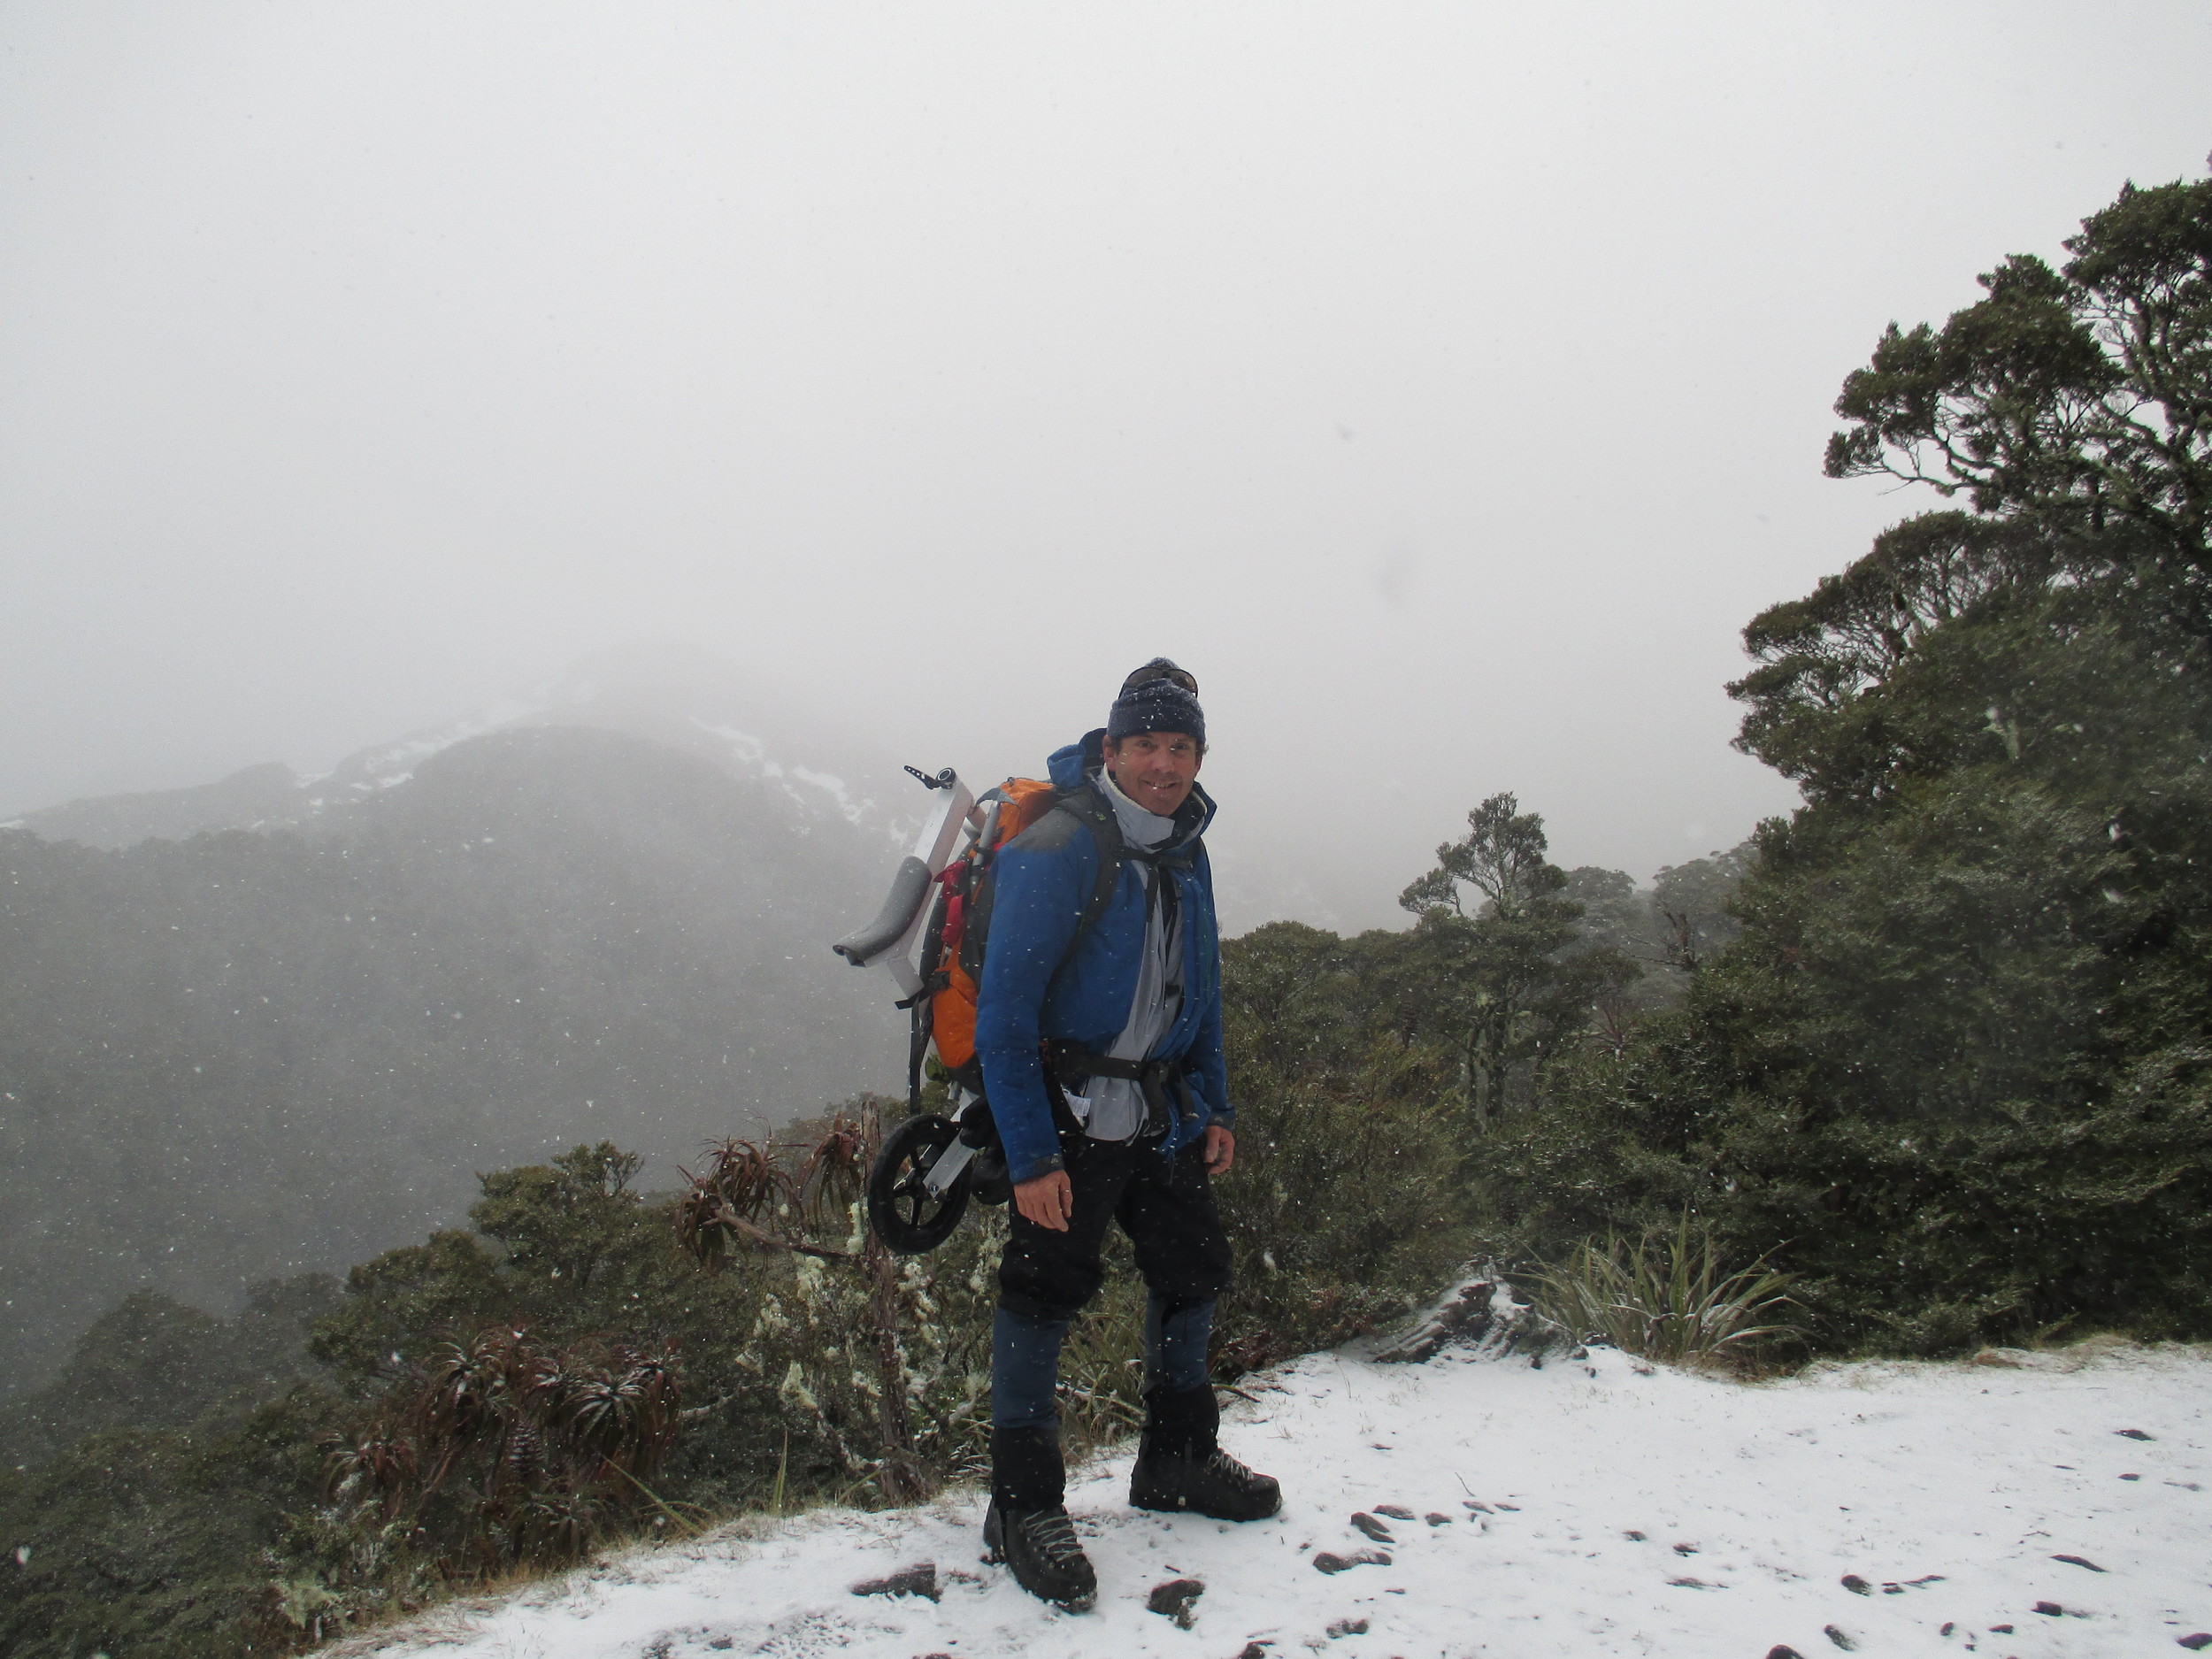   Heading up Mt Arthur in a storm 2015  